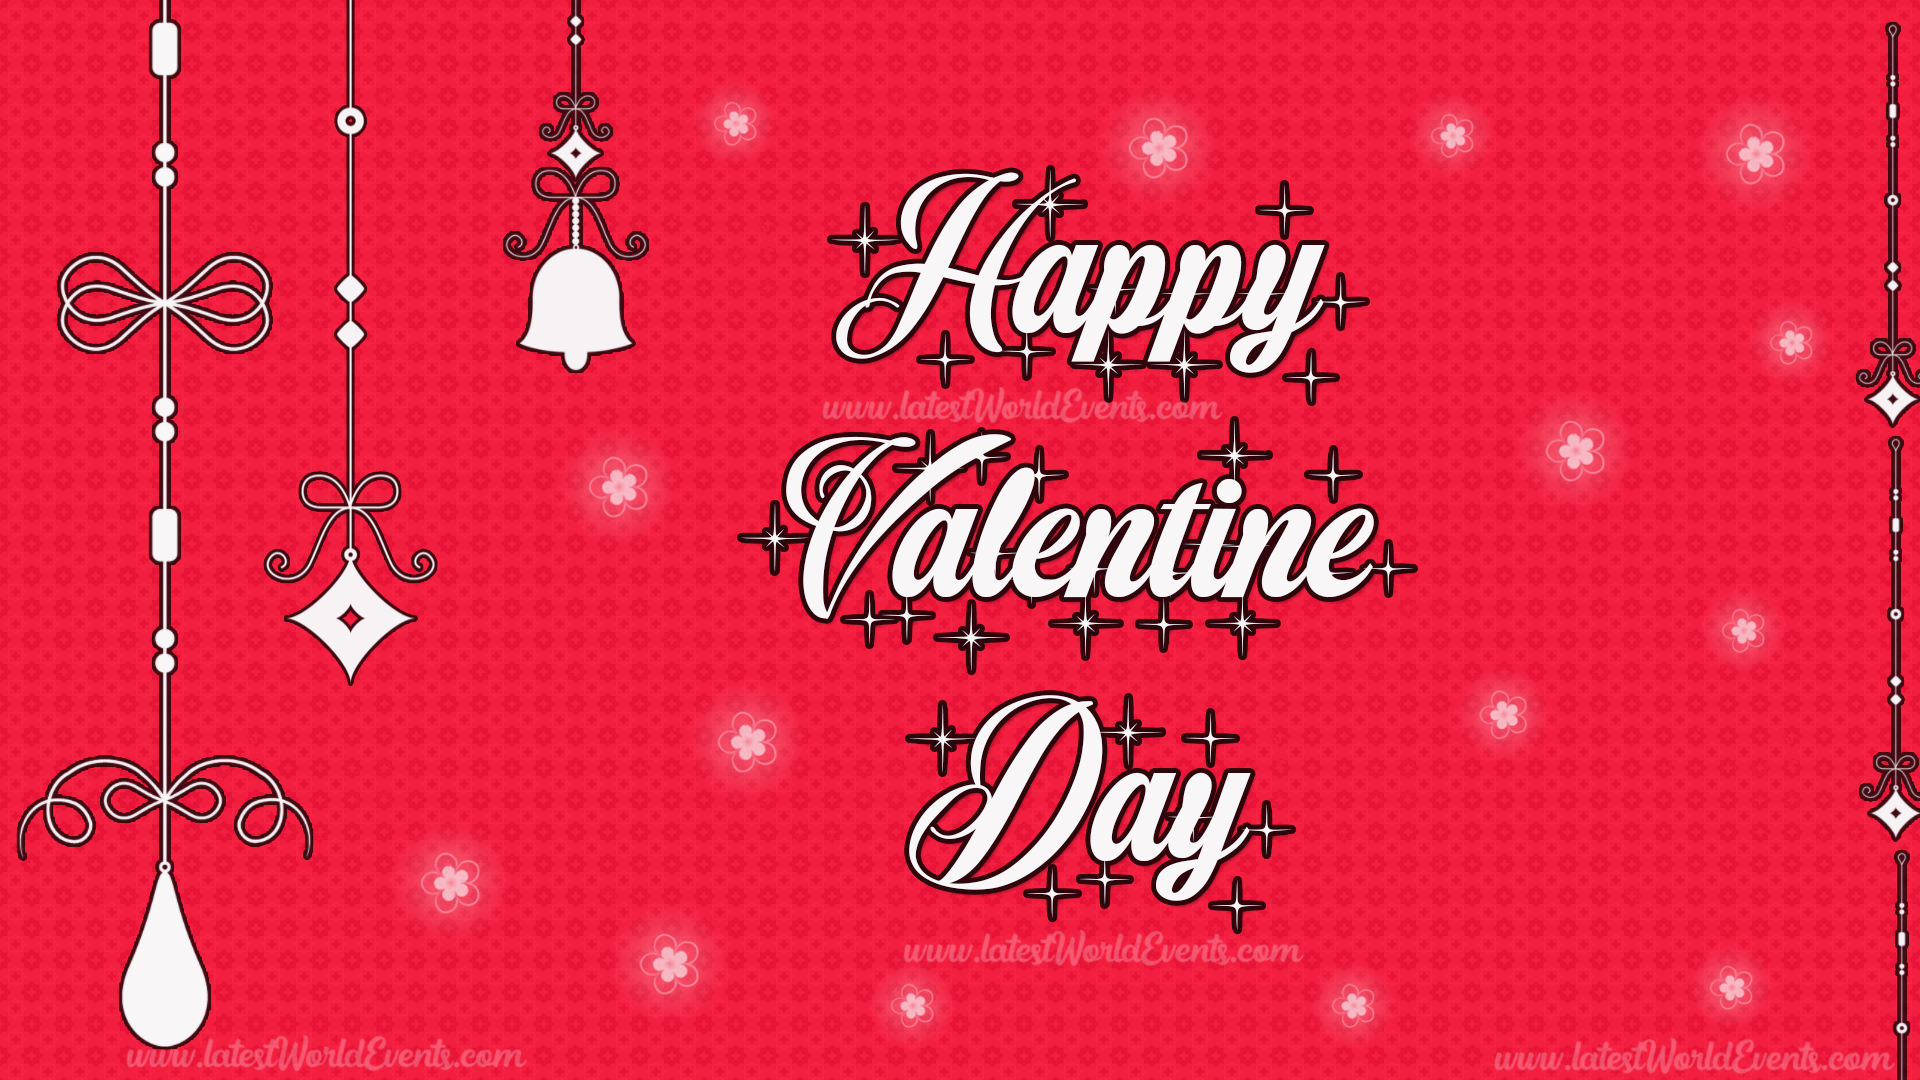 Animated Valentines Day Pictures - 9to5 Car Wallpapers download